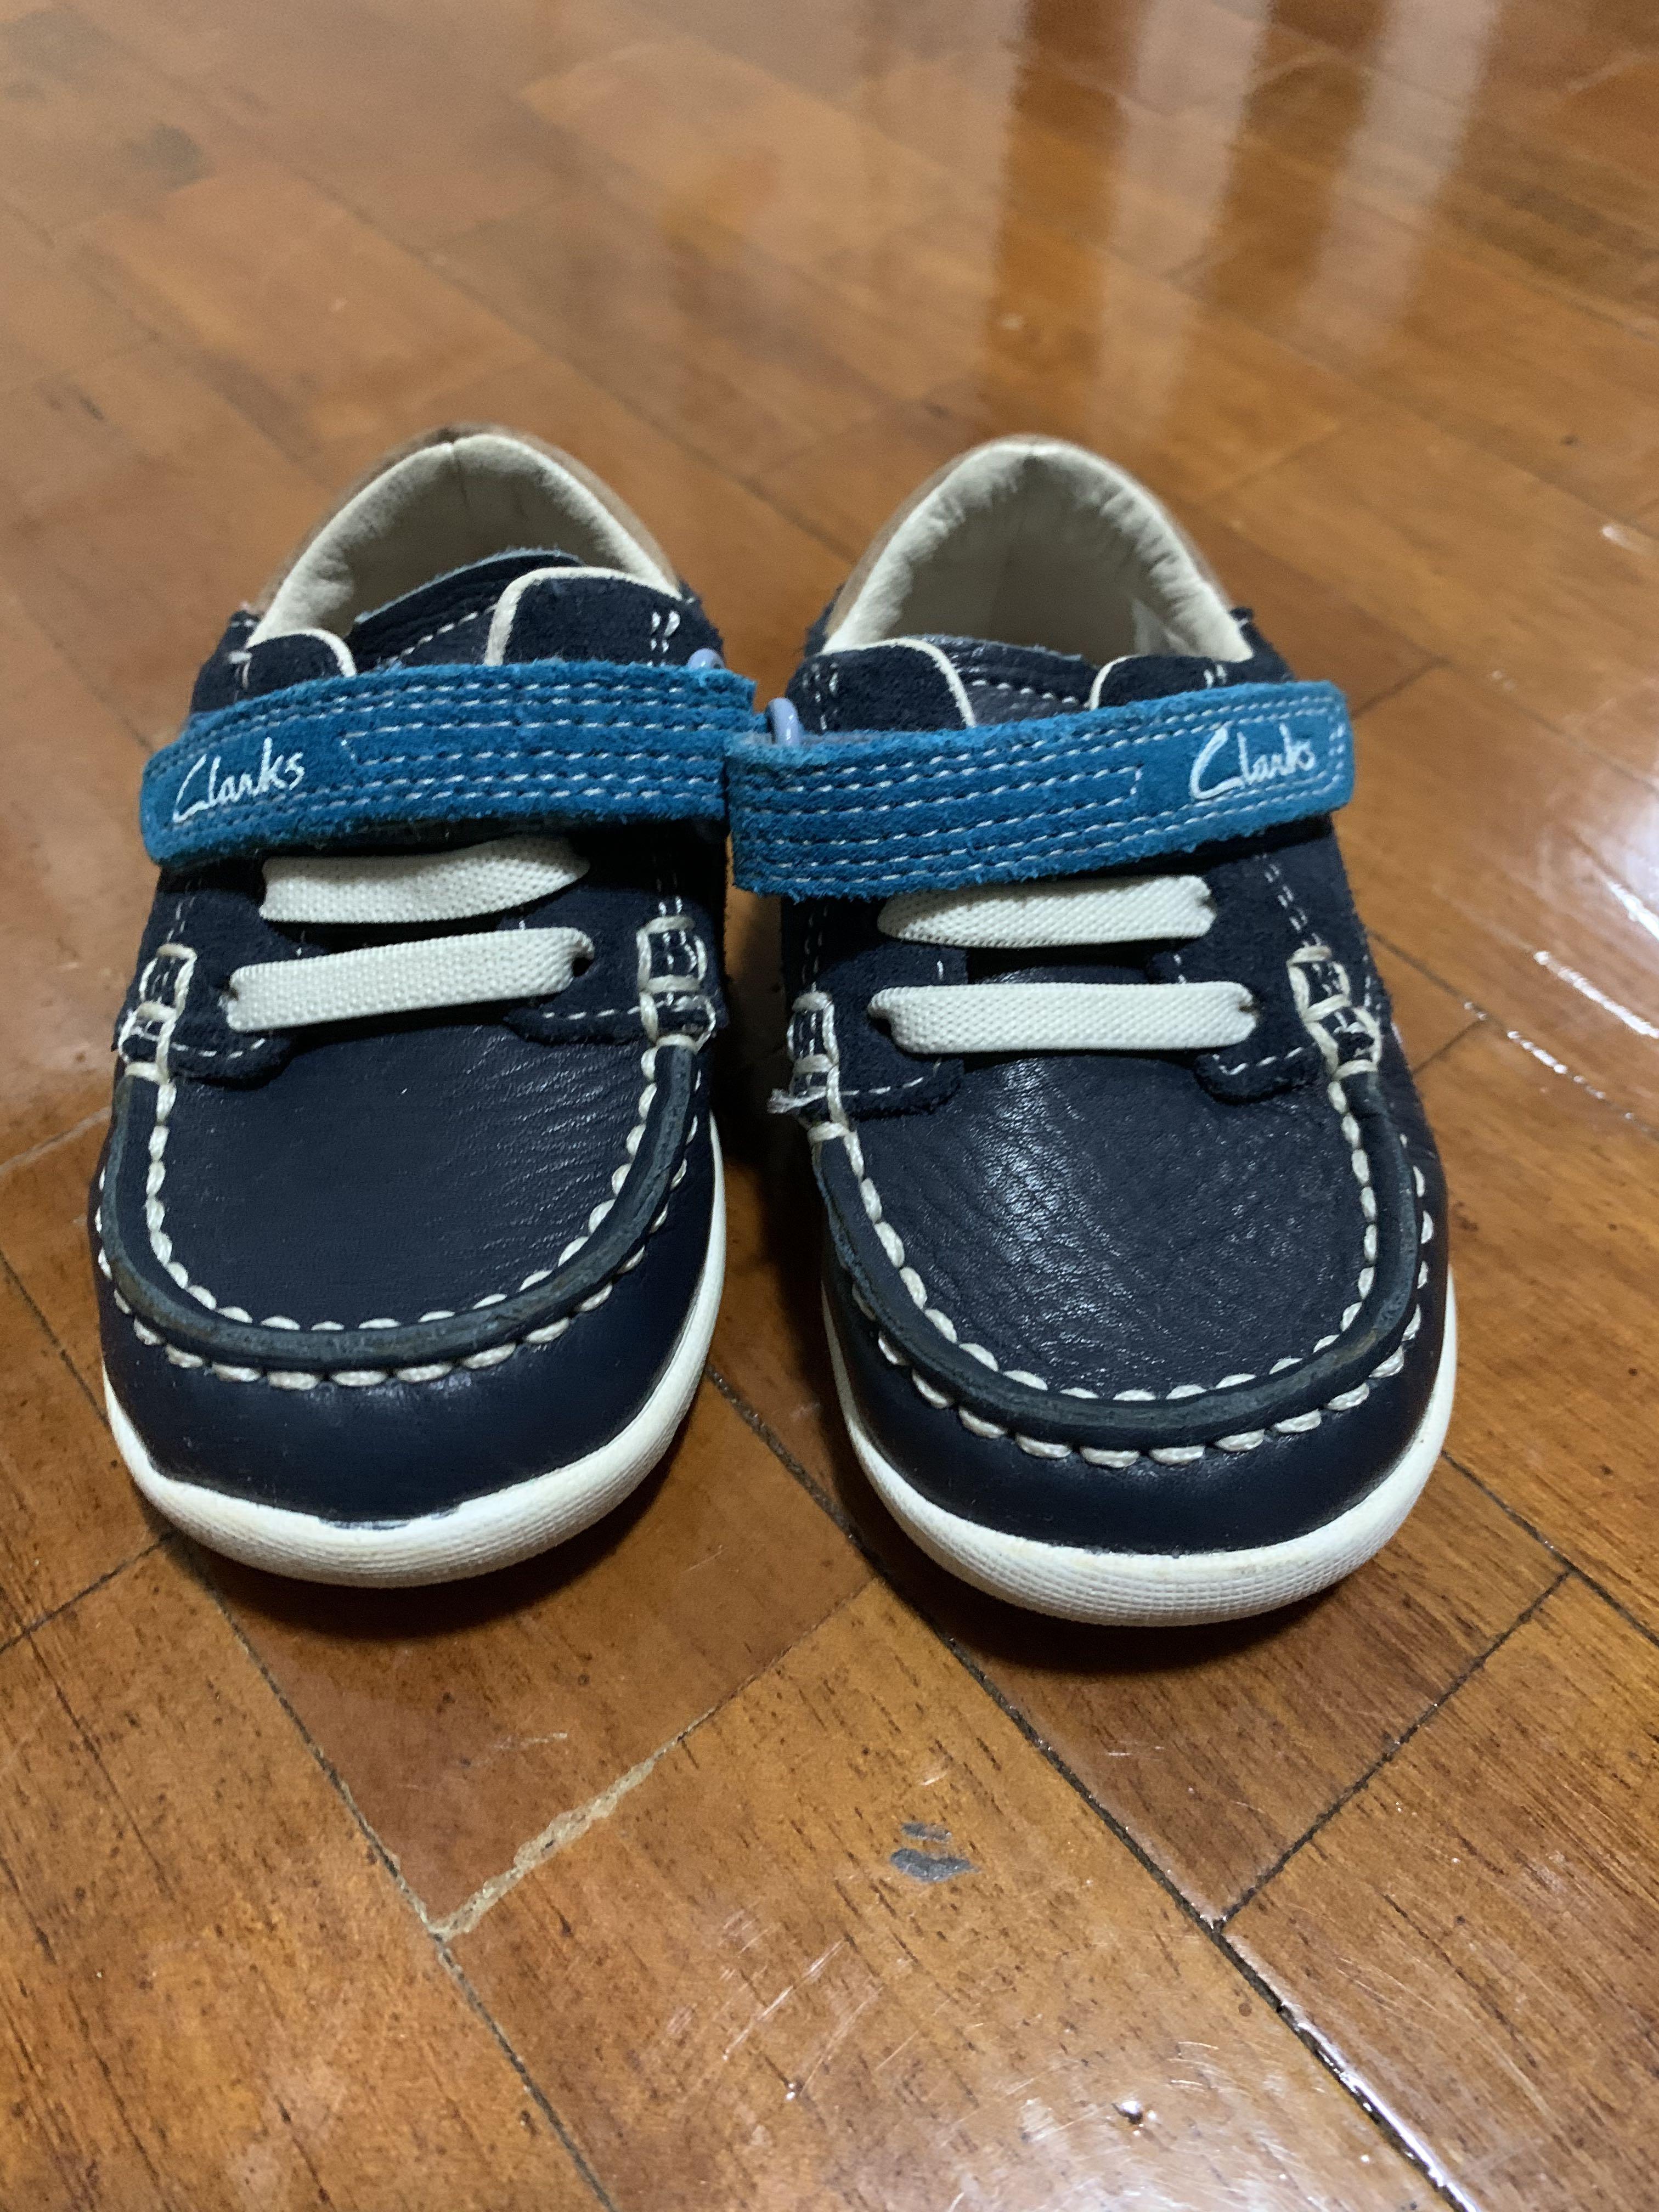 clarks baby walking shoes